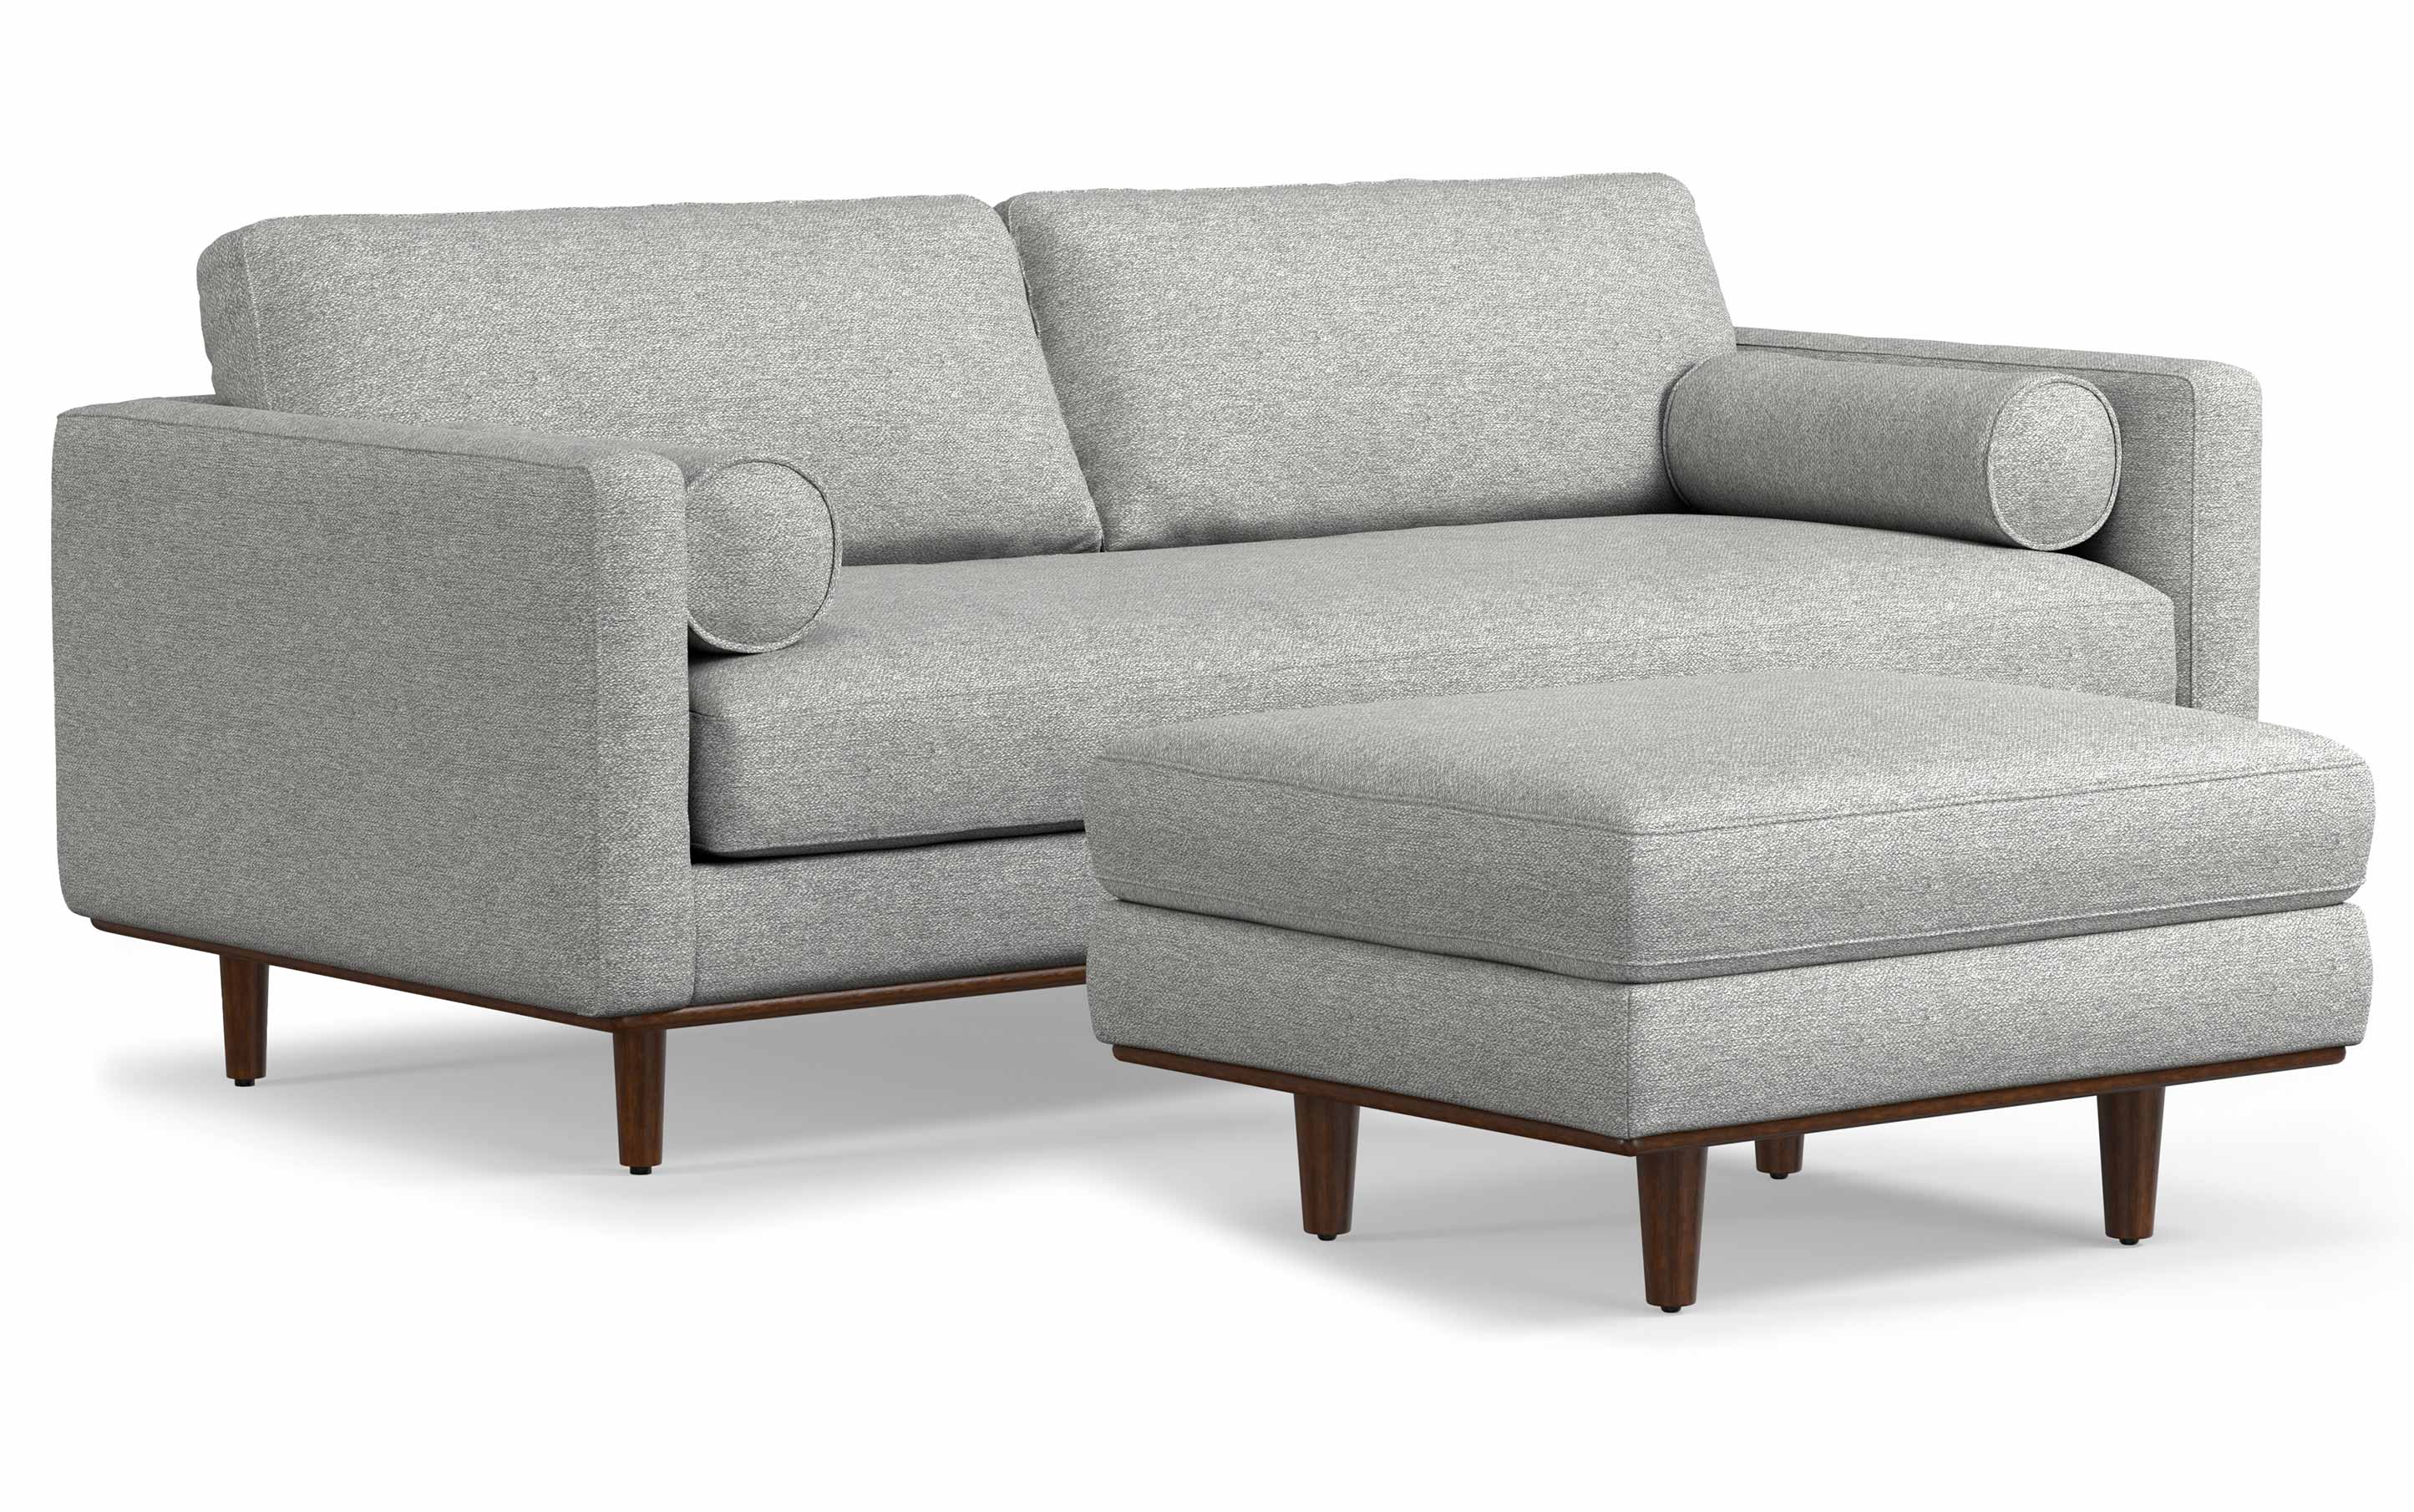 Morrison 89-inch Sofa and Ottoman Set in Woven-Blend Fabric